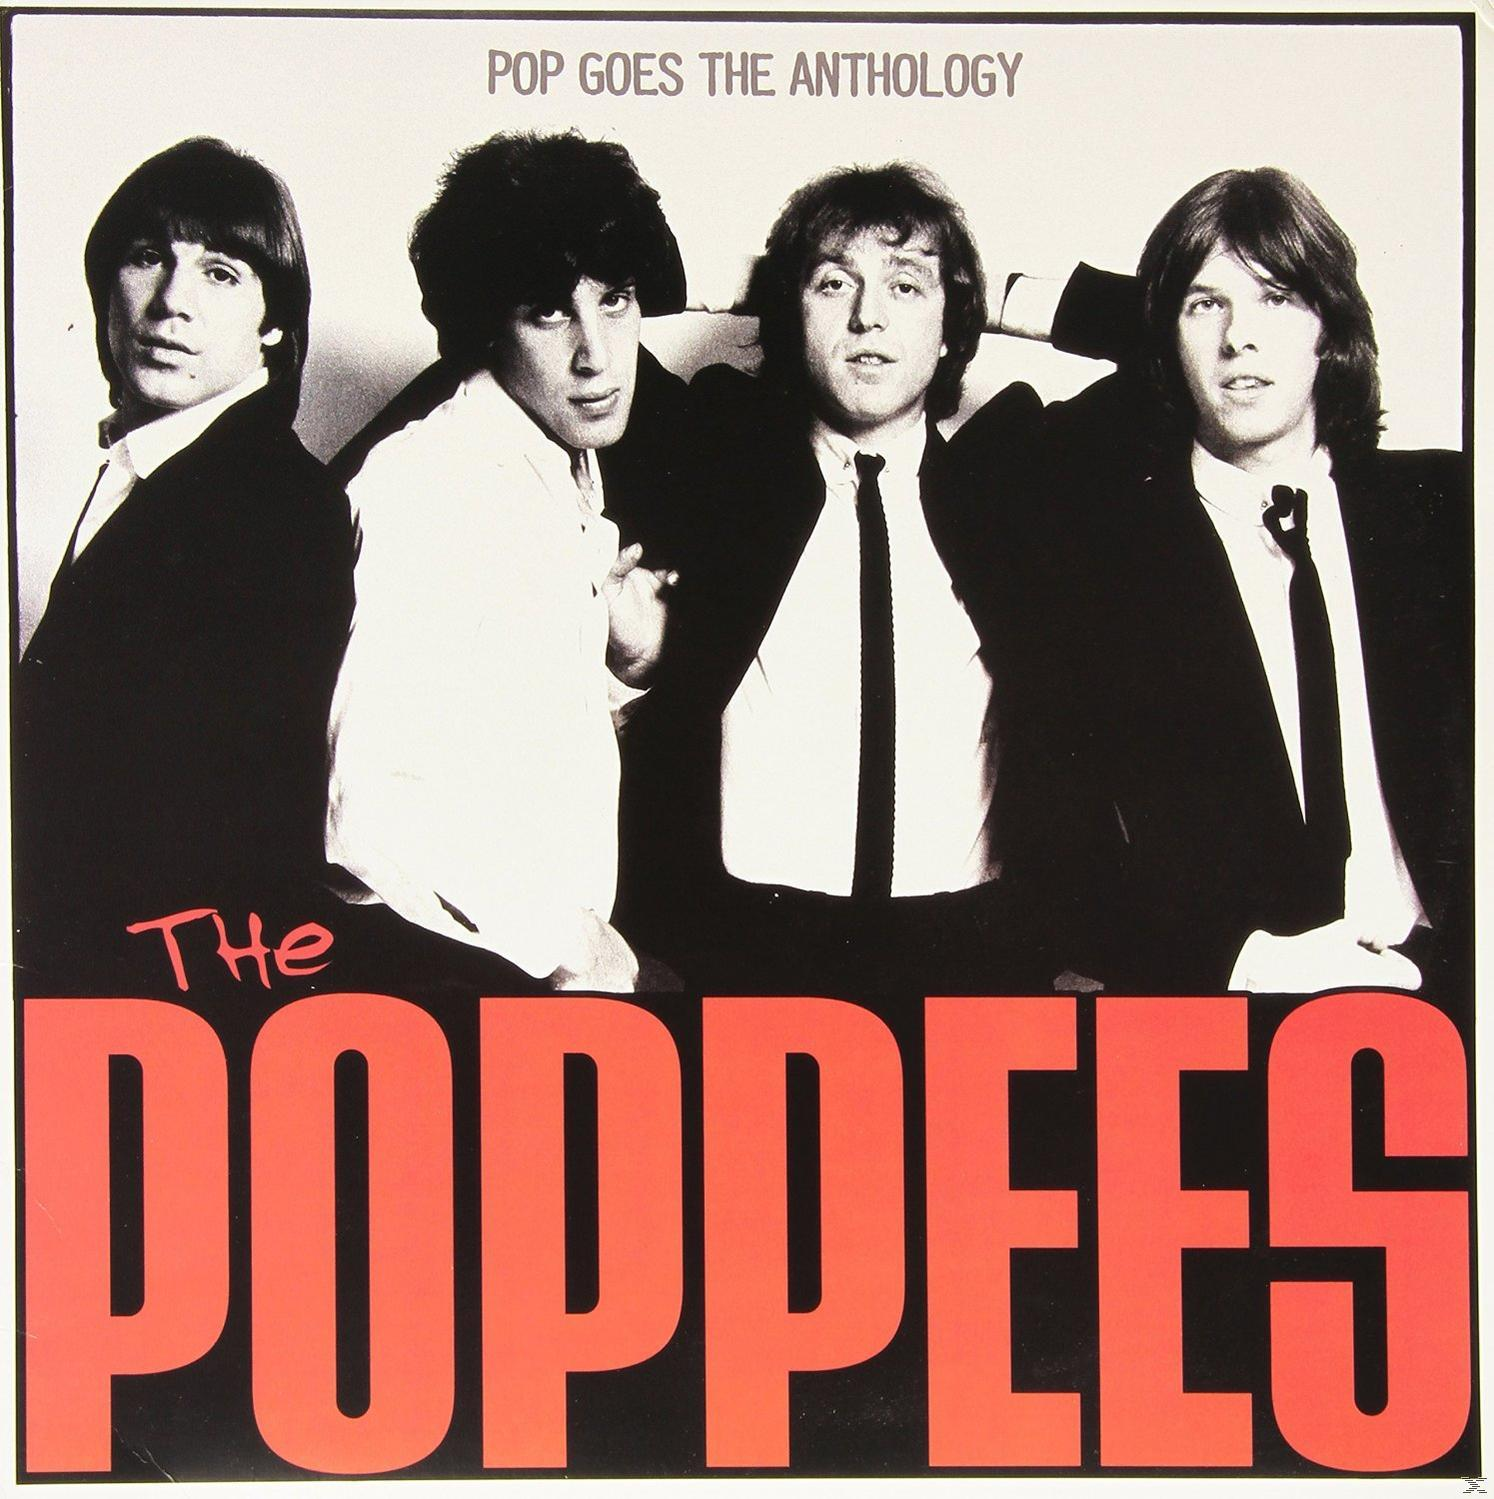 The Poppees - The - (Vinyl) Anthology Pop Goes